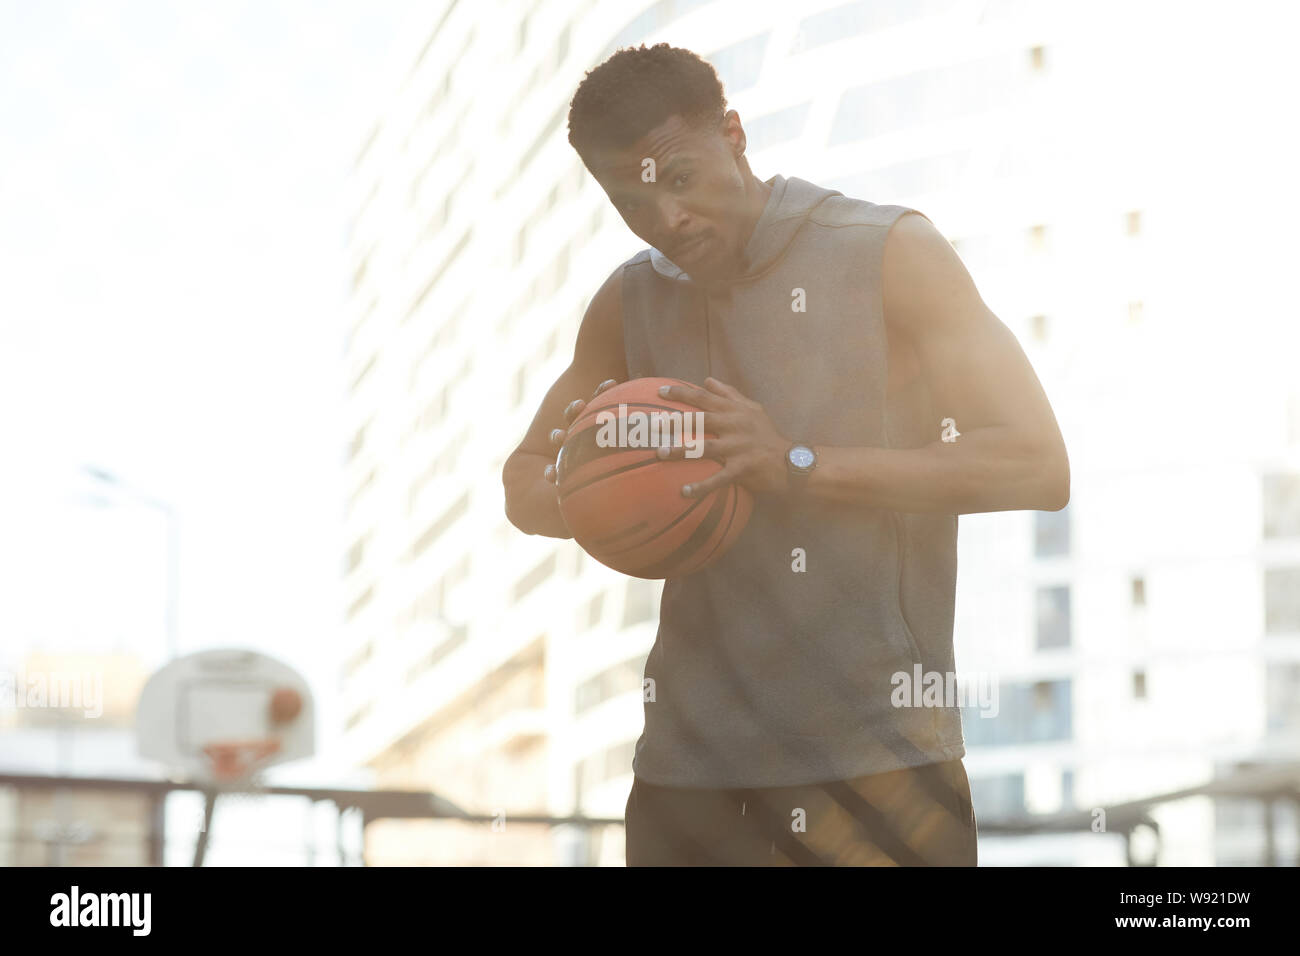 Waist up portrait of handsome African man holding ball while standing in basketball court outdoors, copy space Stock Photo